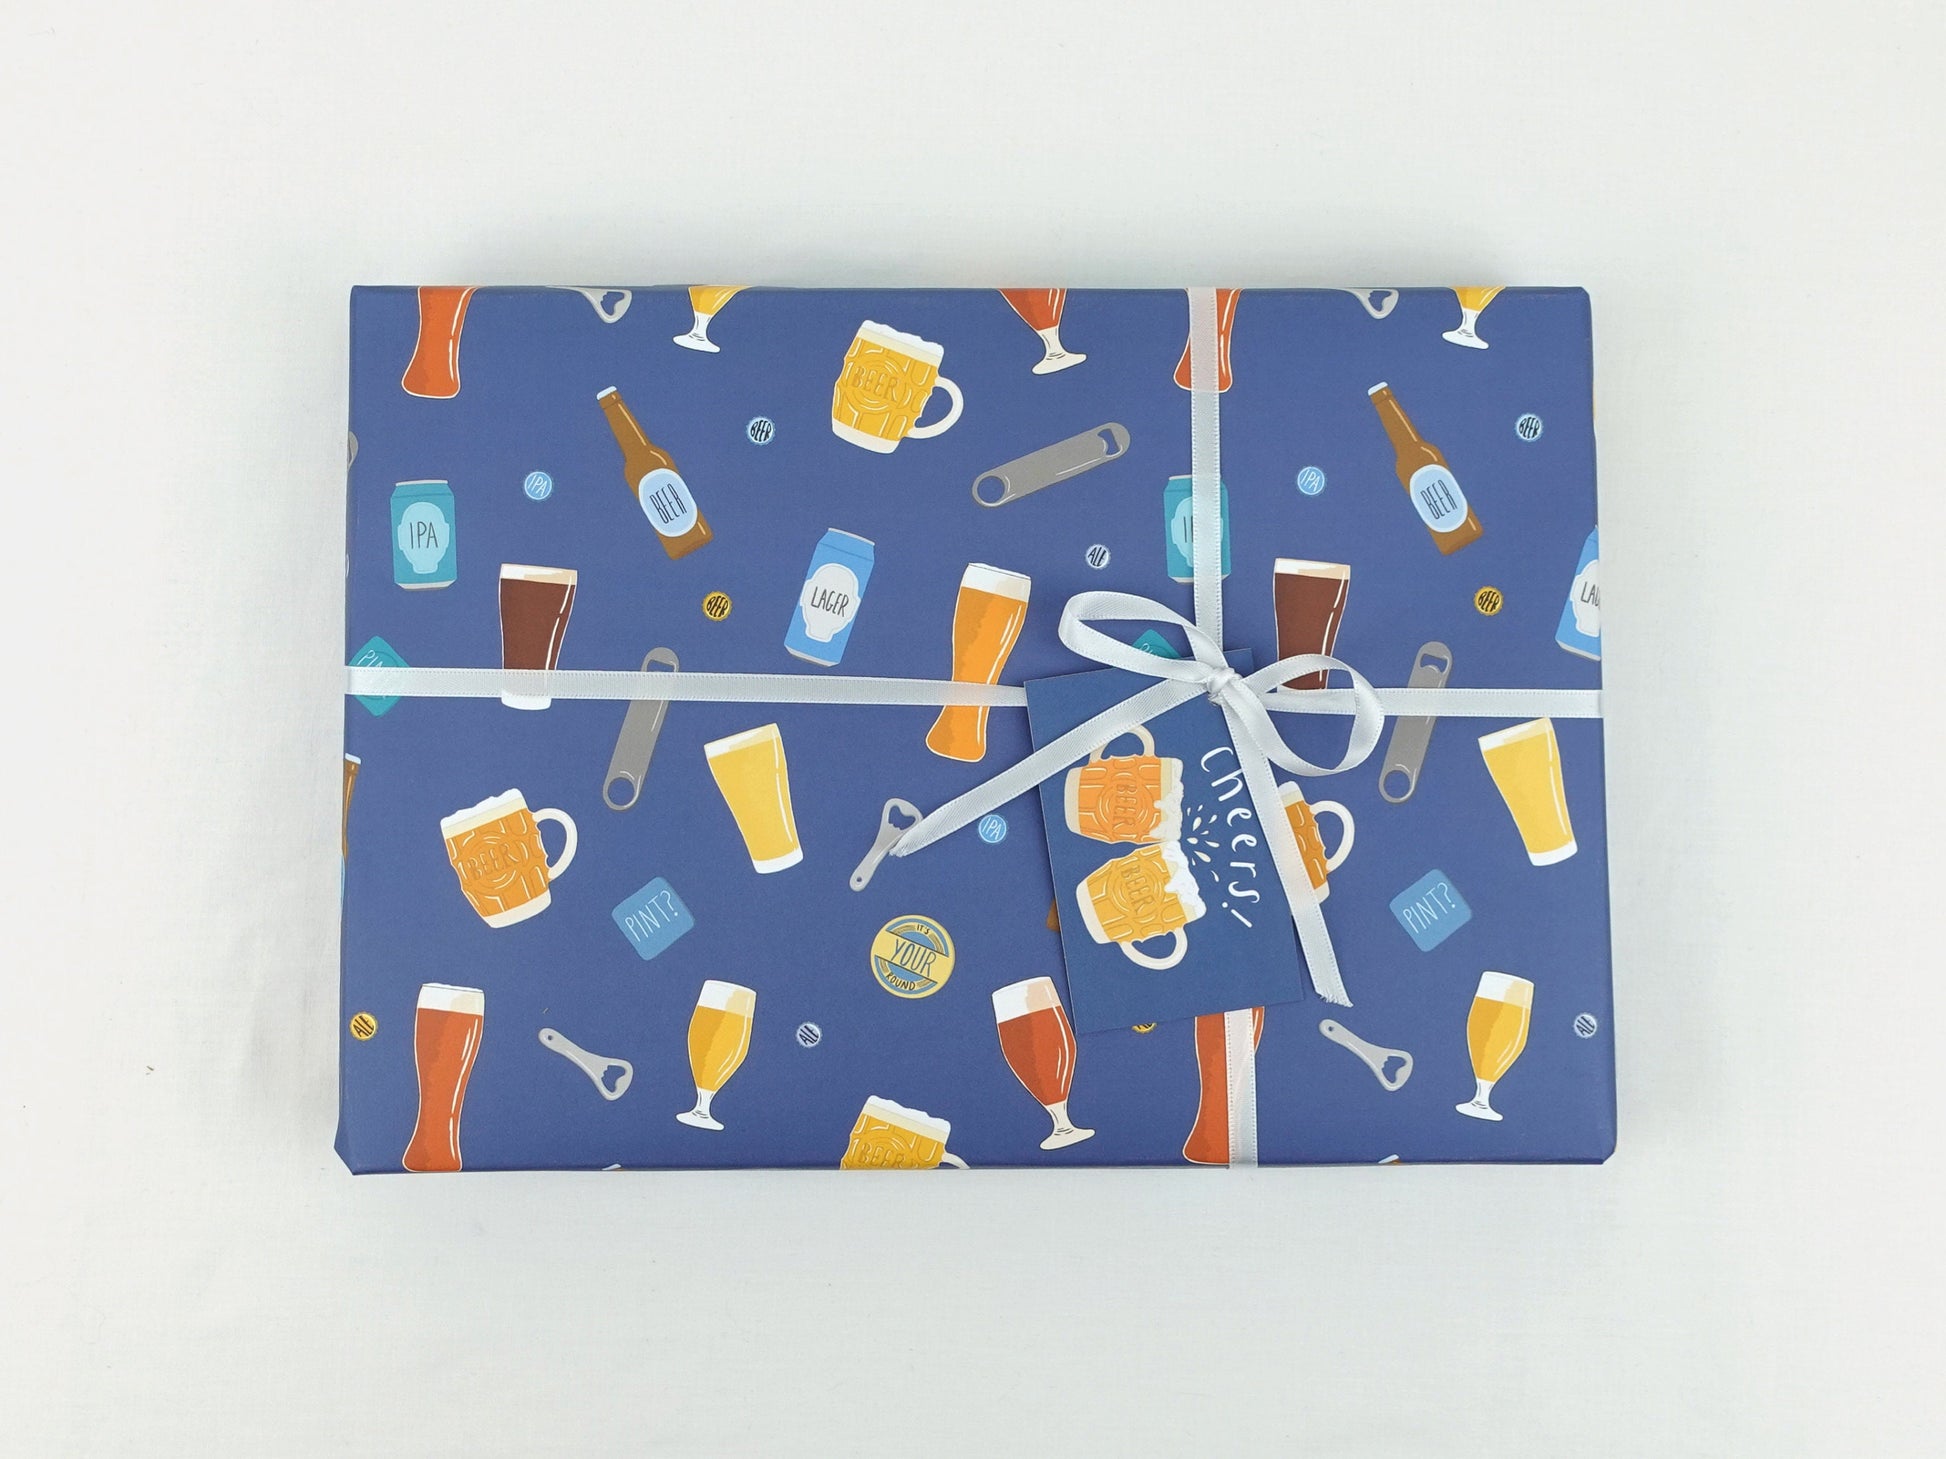 Beer Ale wrapping paper | Dad birthday paper | Eco friendly gift wrap | Premium quality sheets + Tags | Zero plastic packaging 70x50cm